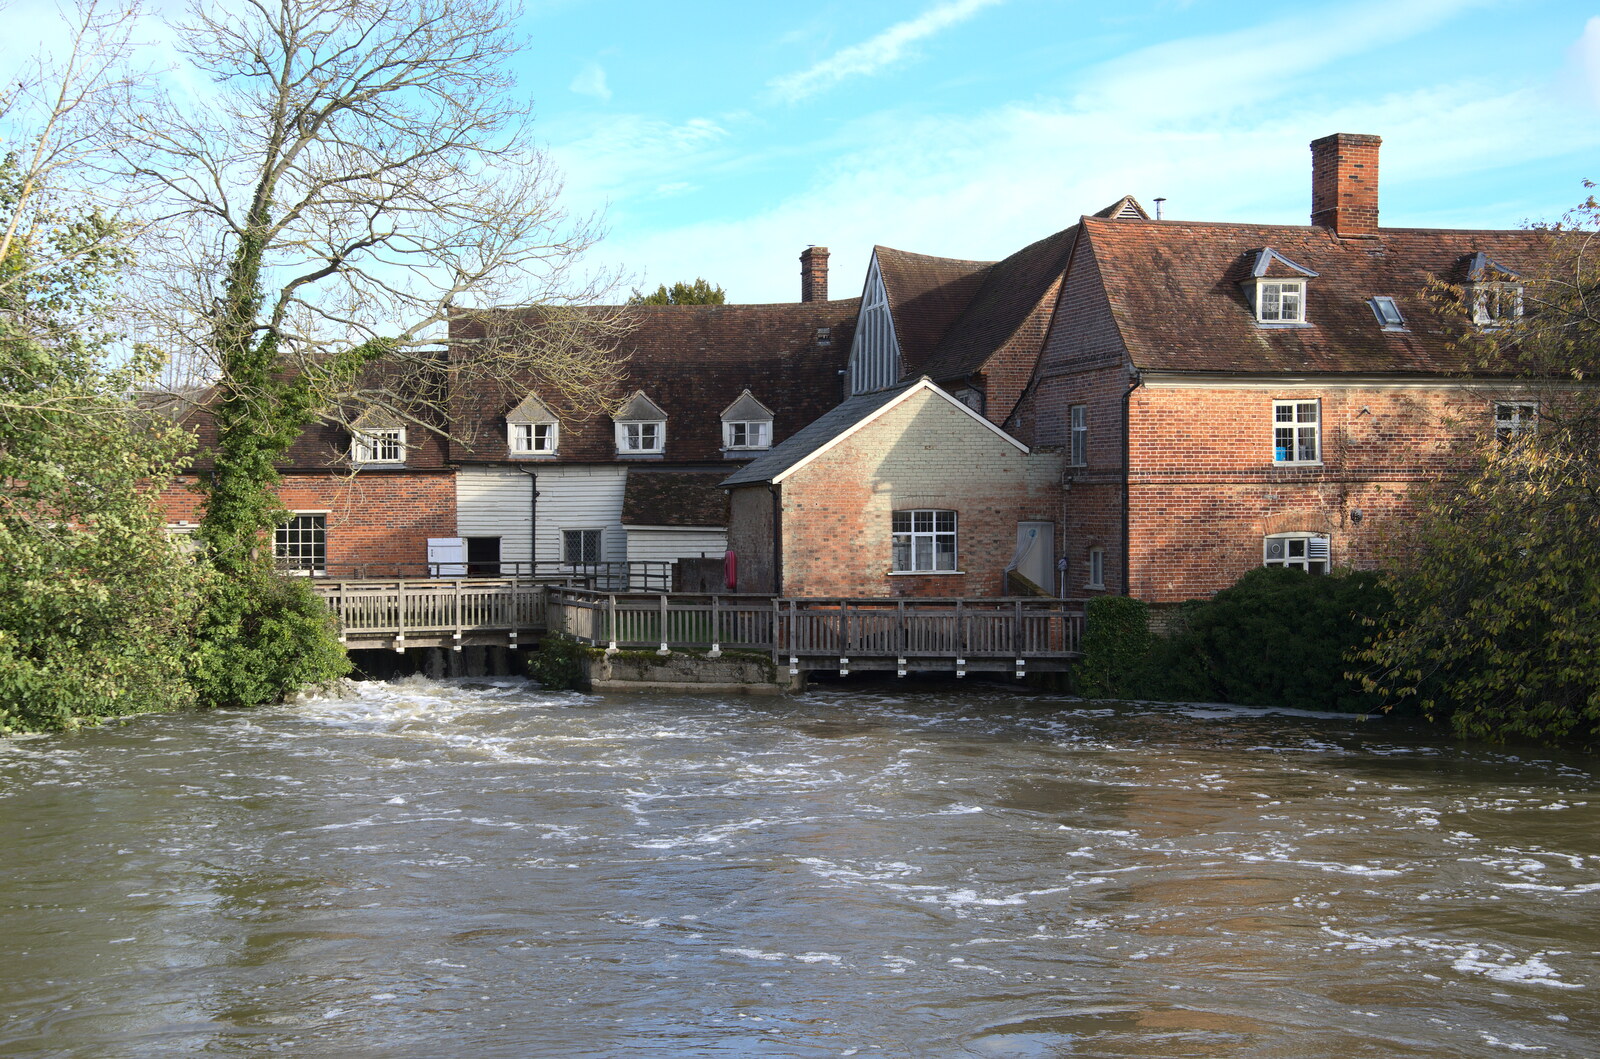 A Postcard from Flatford and Dedham, Suffolk and Essex, 9th November 2022: The other side of Flatford Mill